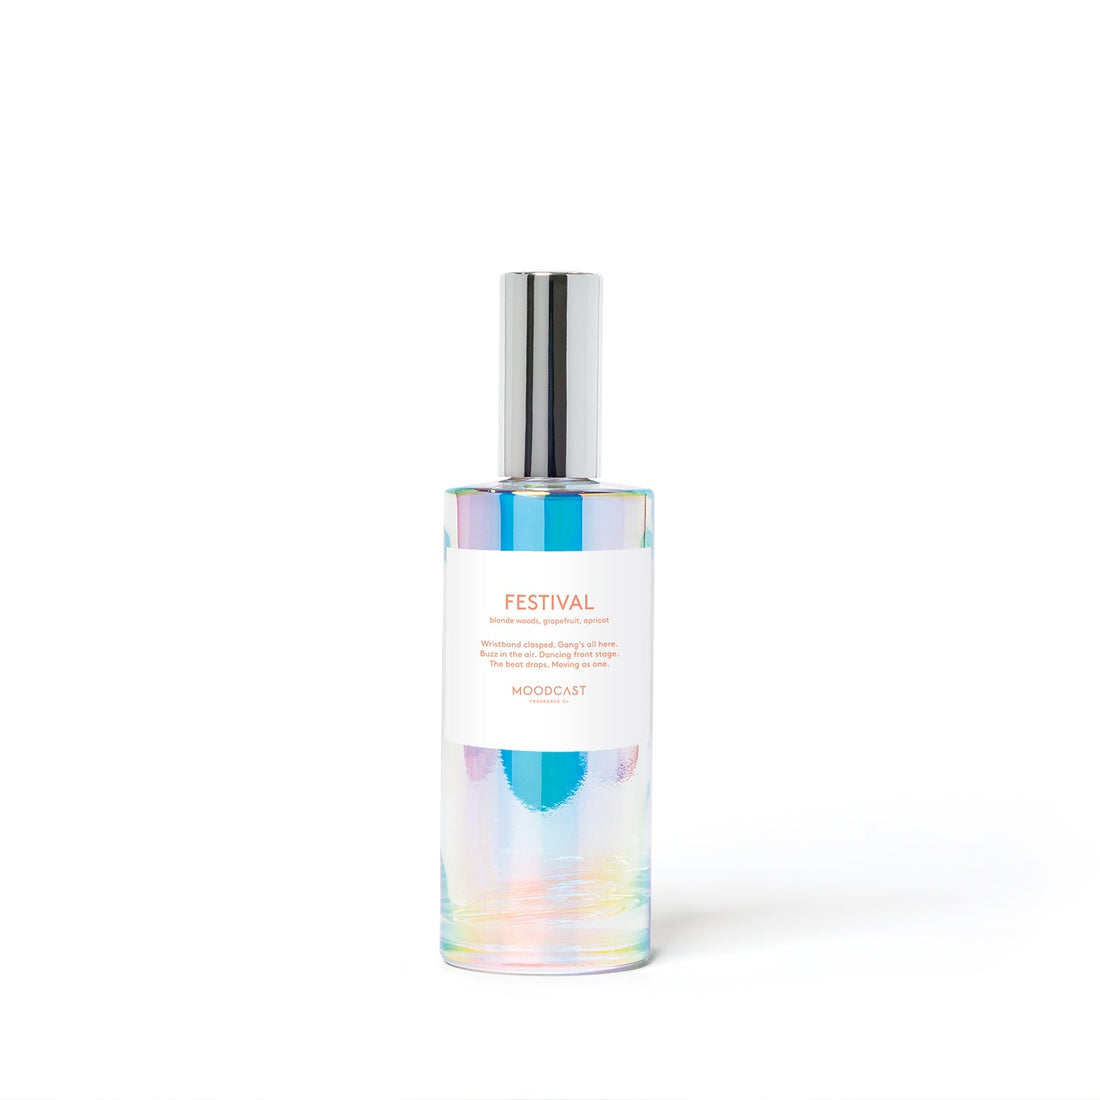 Festival - Vibes Collection (Iridescent) - 3.4fl oz/100ml Glass Room & Linen Spray - Key Notes: Blonde Woods, Grapefruit, Apricot